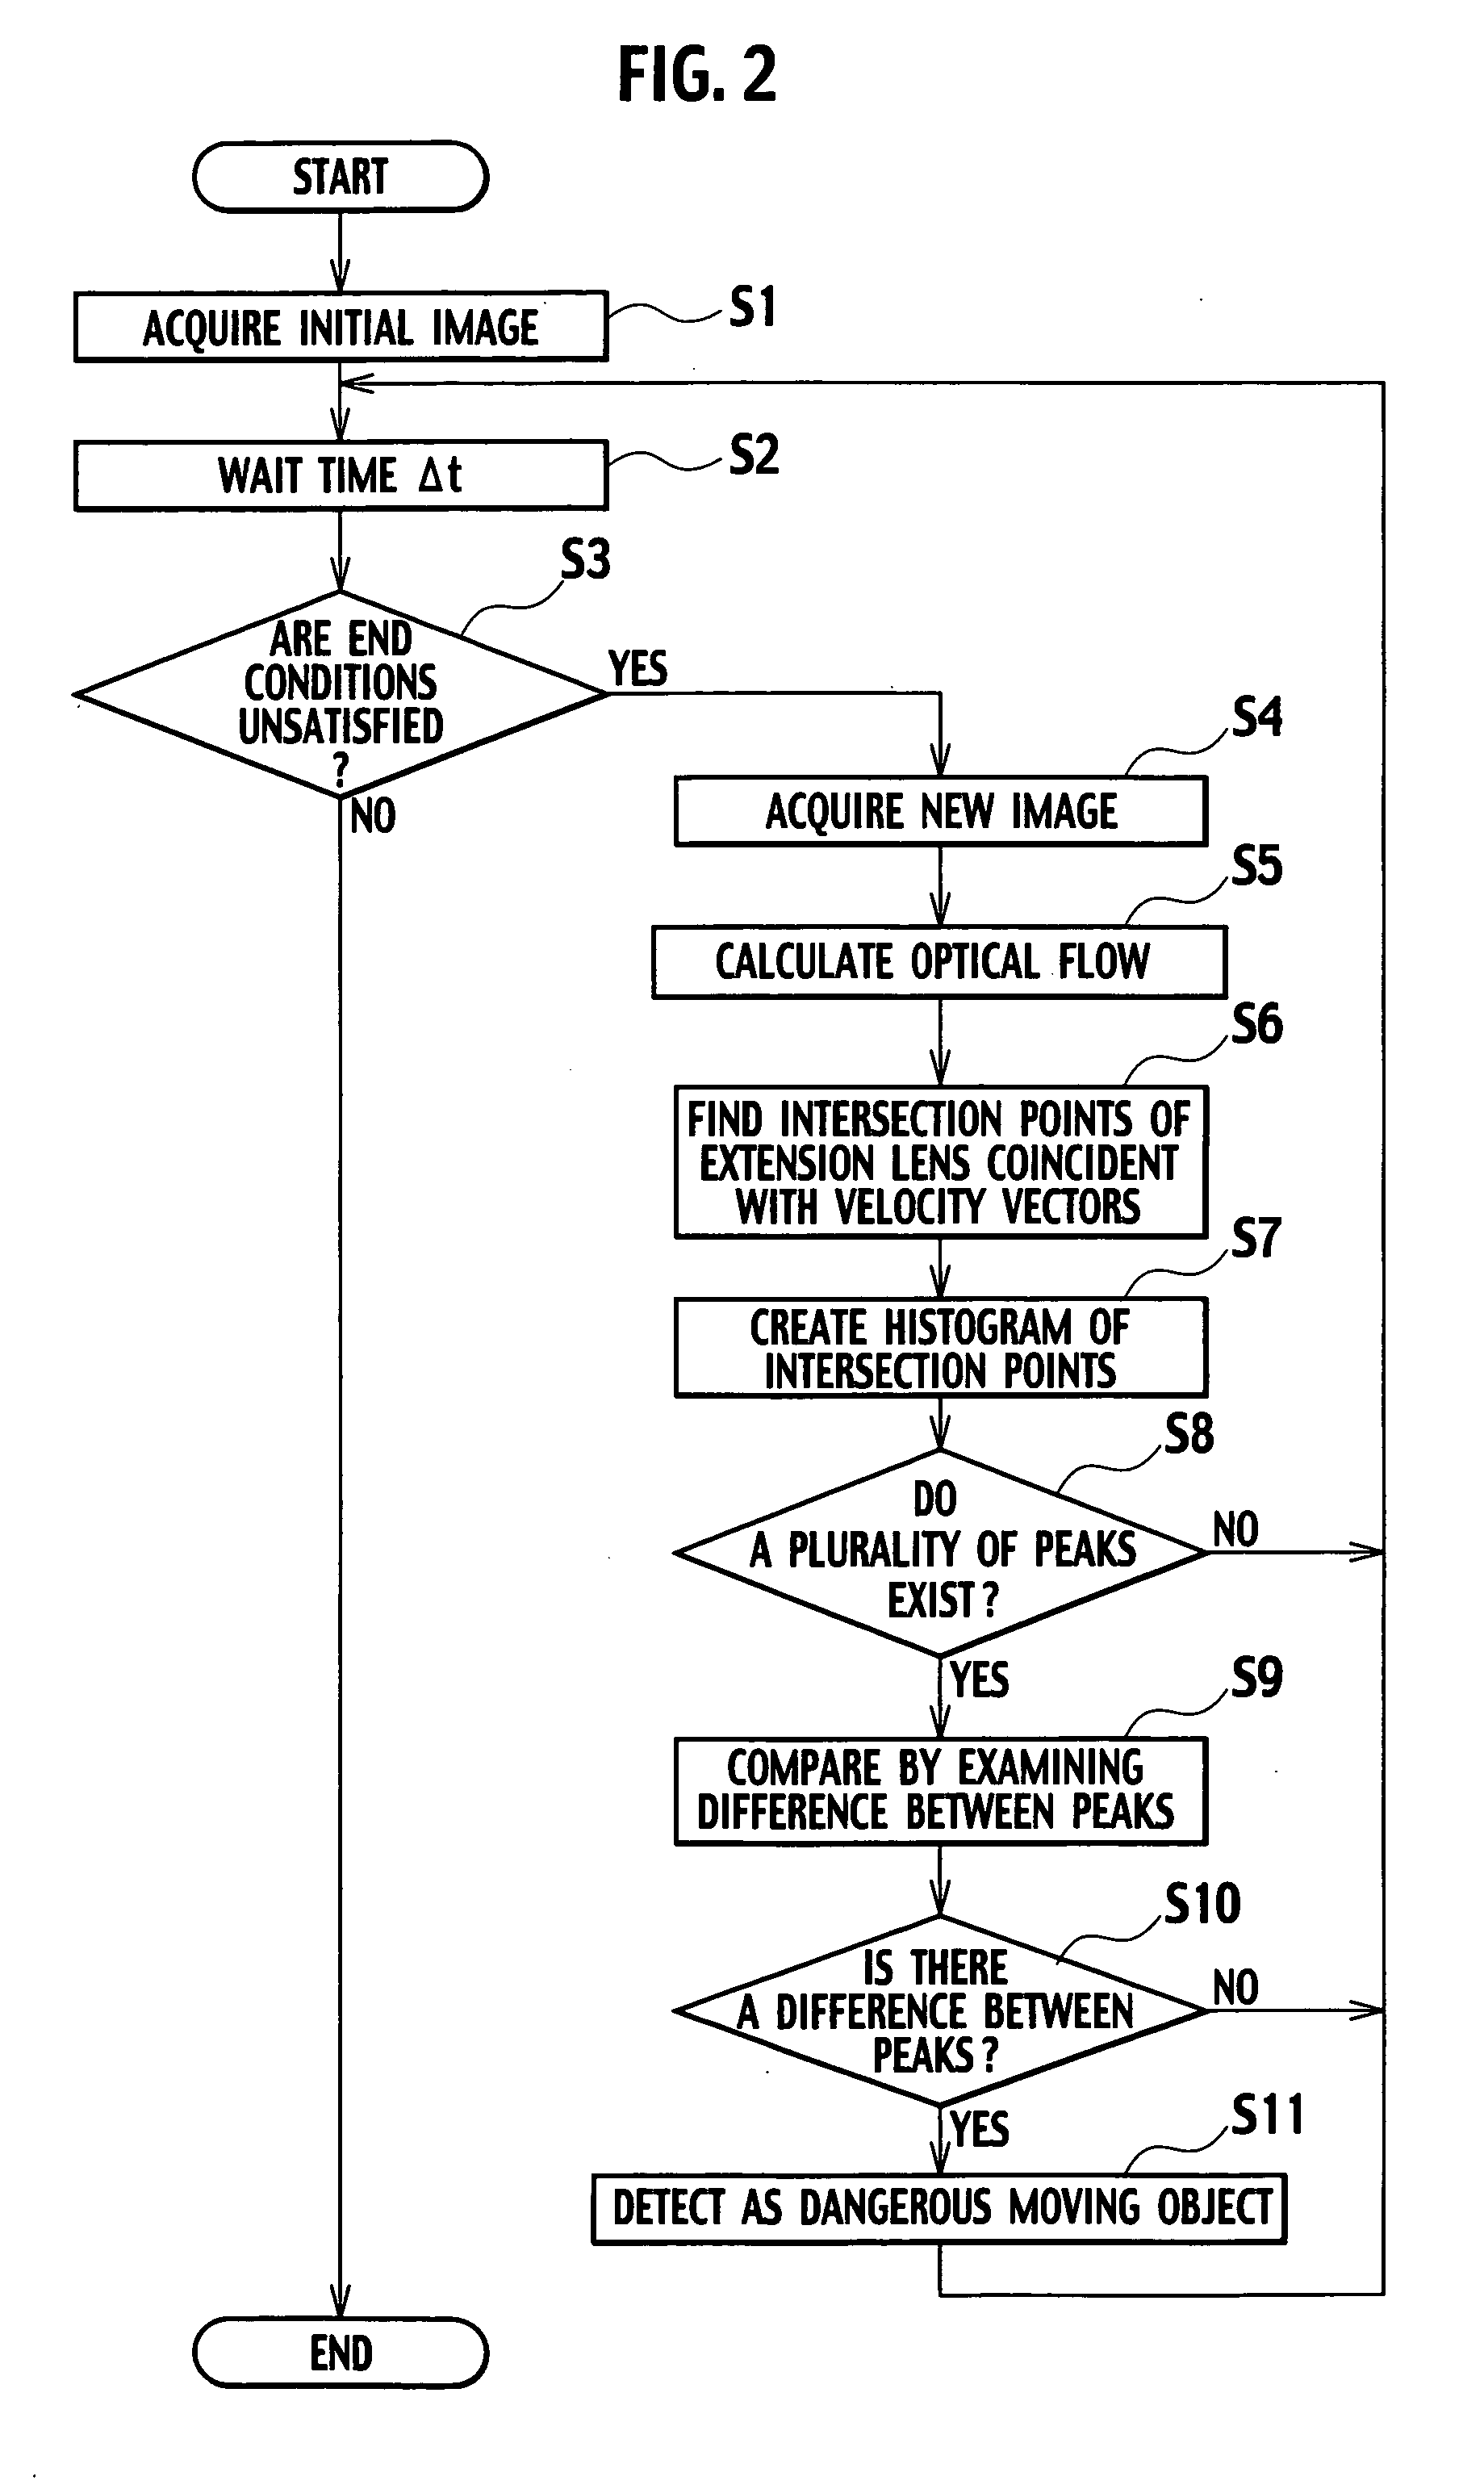 Moving obstacle detecting device